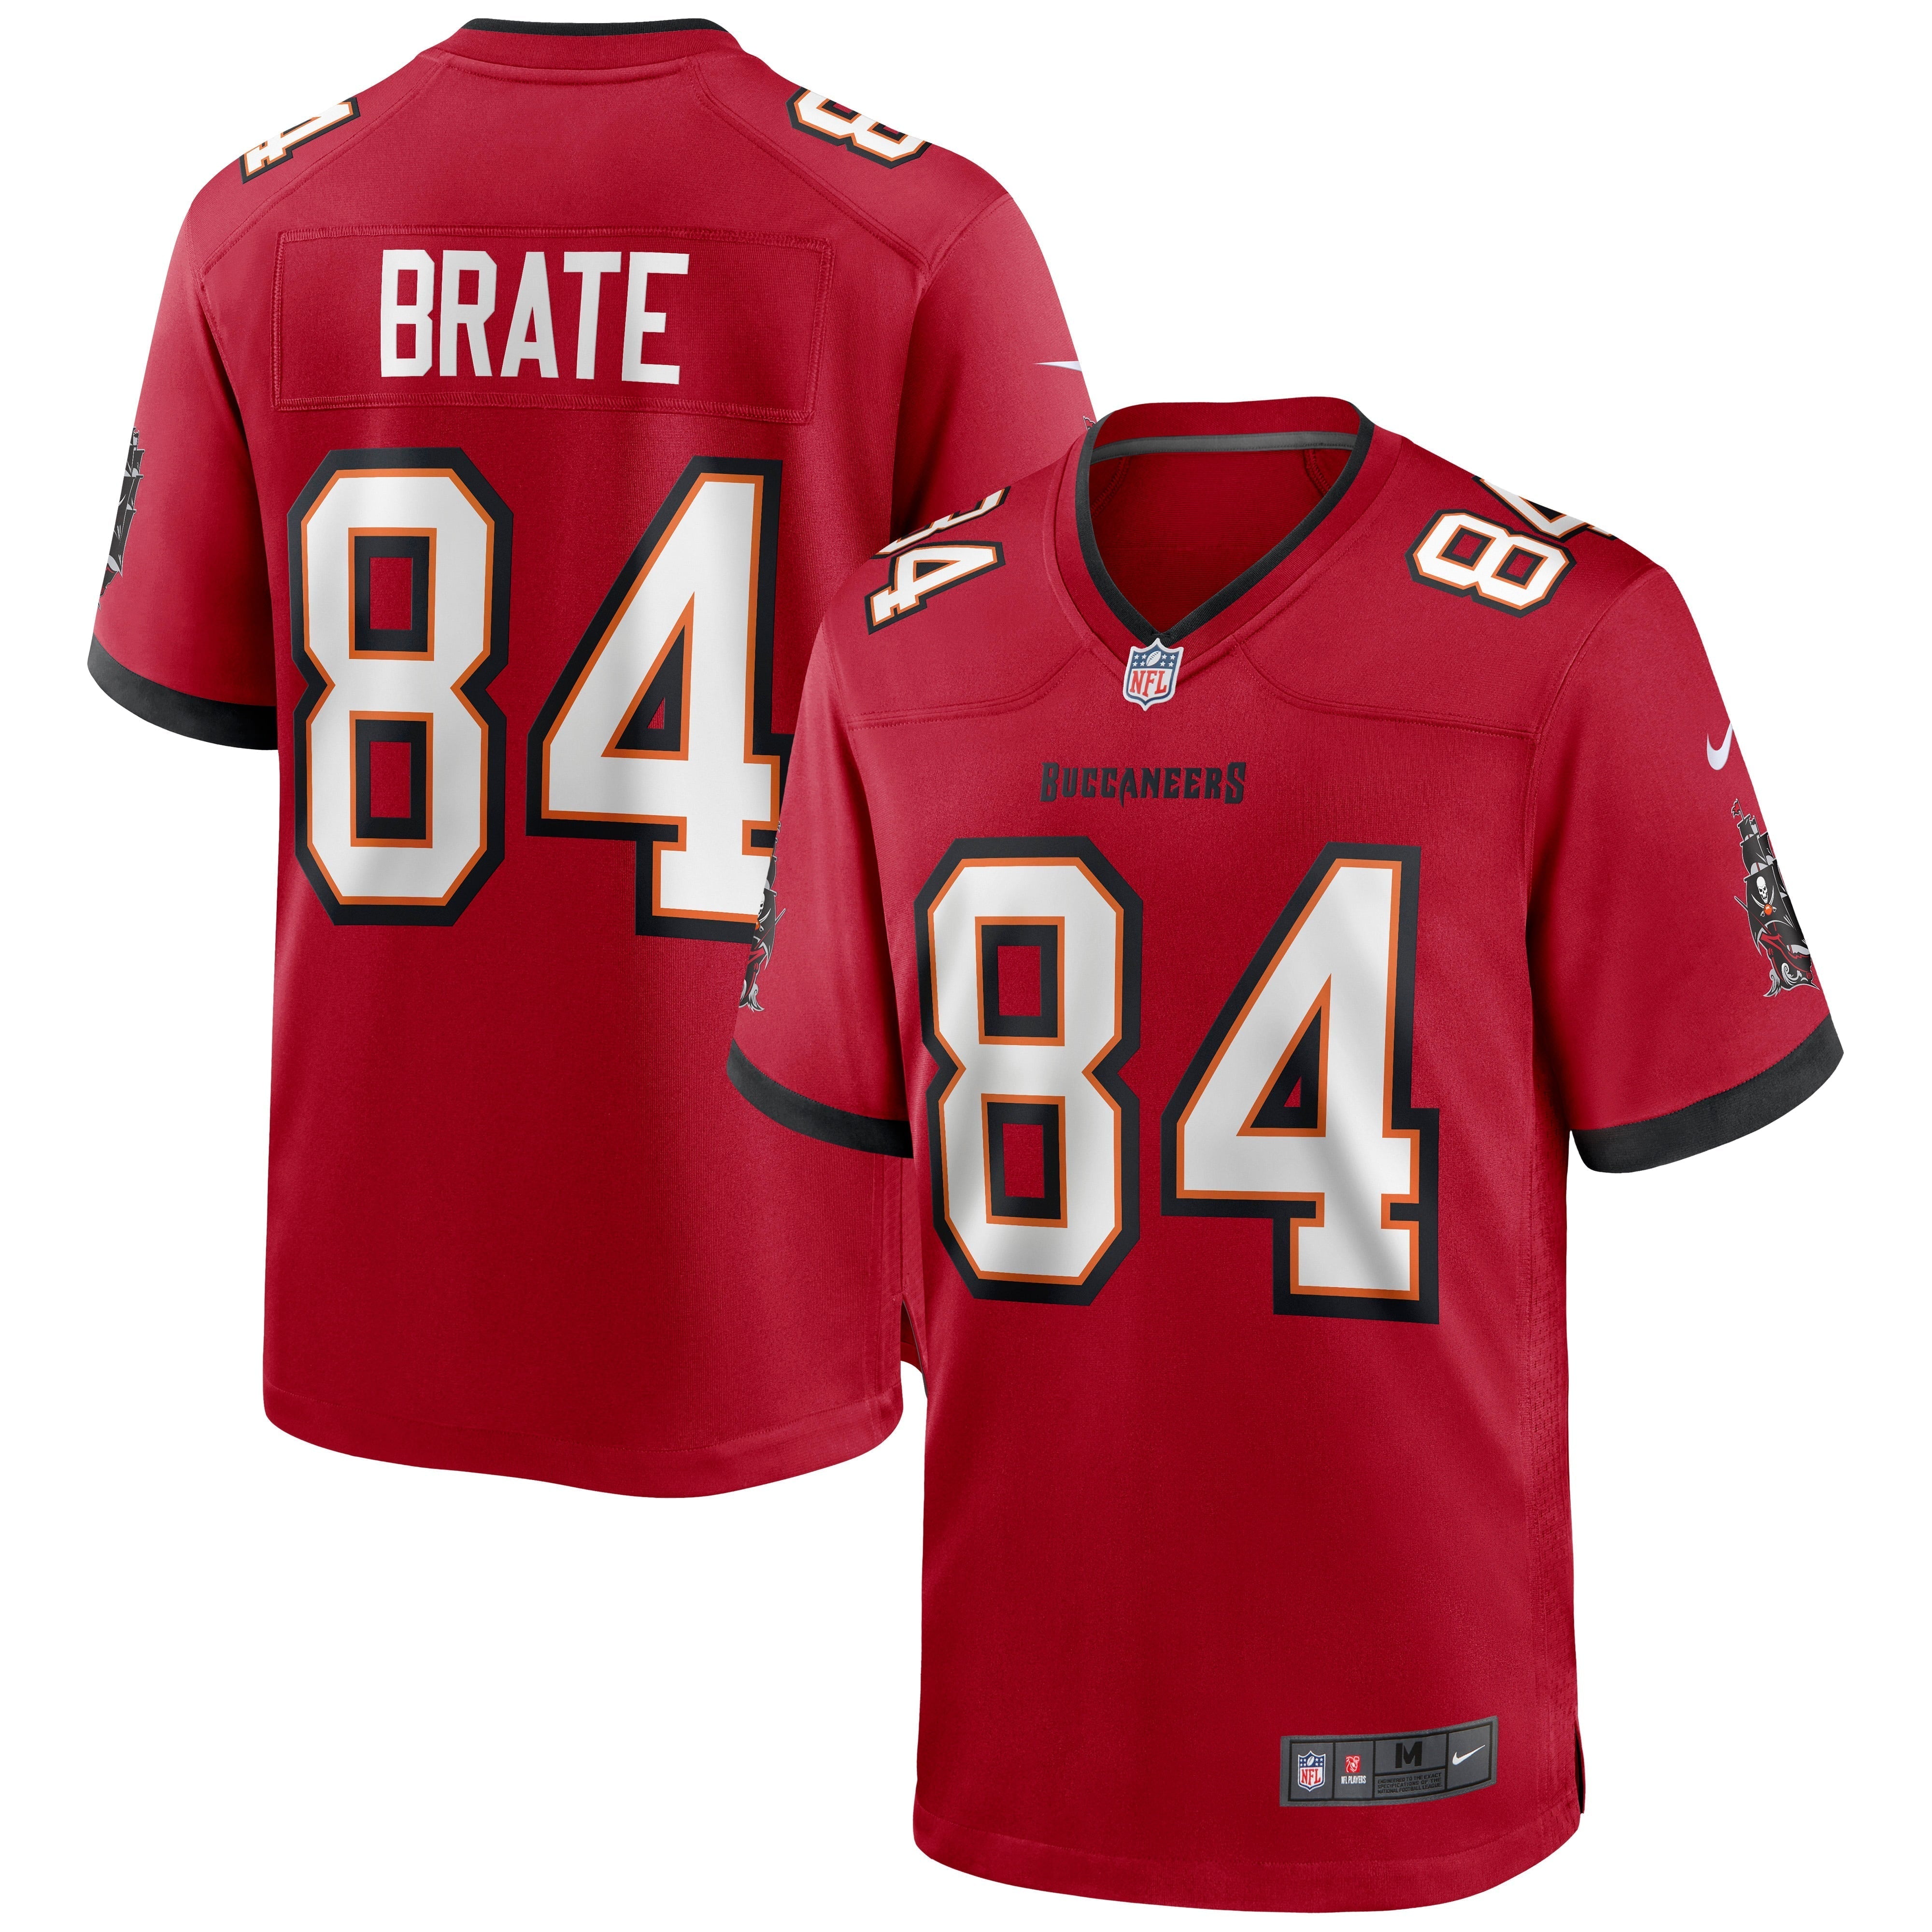 Nike Tampa Bay Buccaneers No84 Cameron Brate Red Team Color Men's Super Bowl LV Champions Patch NFL Vapor Untouchable Limited Jersey